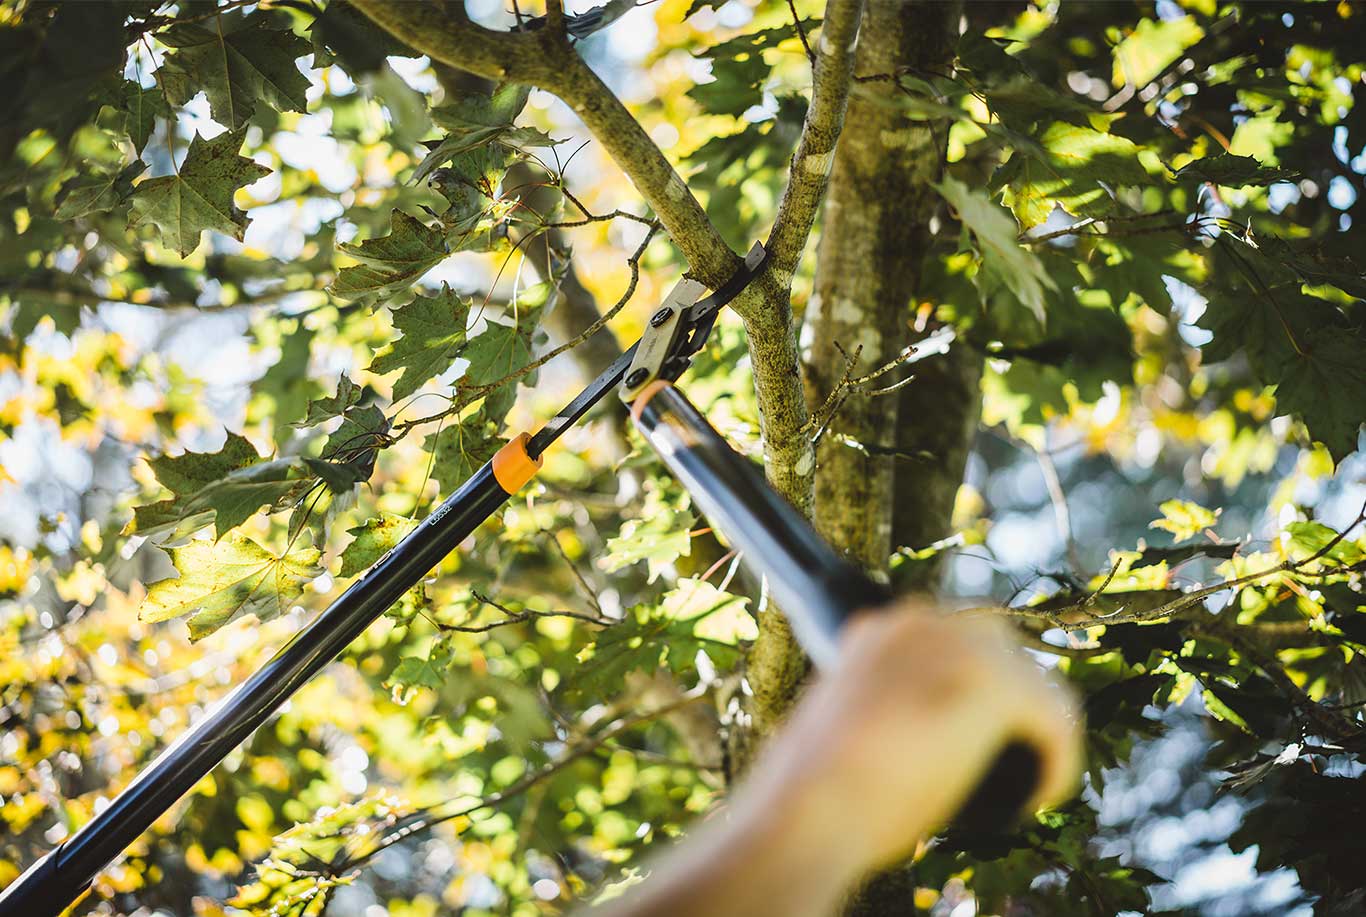 Tree Pruning & Tree Removal-Palm Springs Tree Trimming and Tree Removal Services-We Offer Tree Trimming Services, Tree Removal, Tree Pruning, Tree Cutting, Residential and Commercial Tree Trimming Services, Storm Damage, Emergency Tree Removal, Land Clearing, Tree Companies, Tree Care Service, Stump Grinding, and we're the Best Tree Trimming Company Near You Guaranteed!